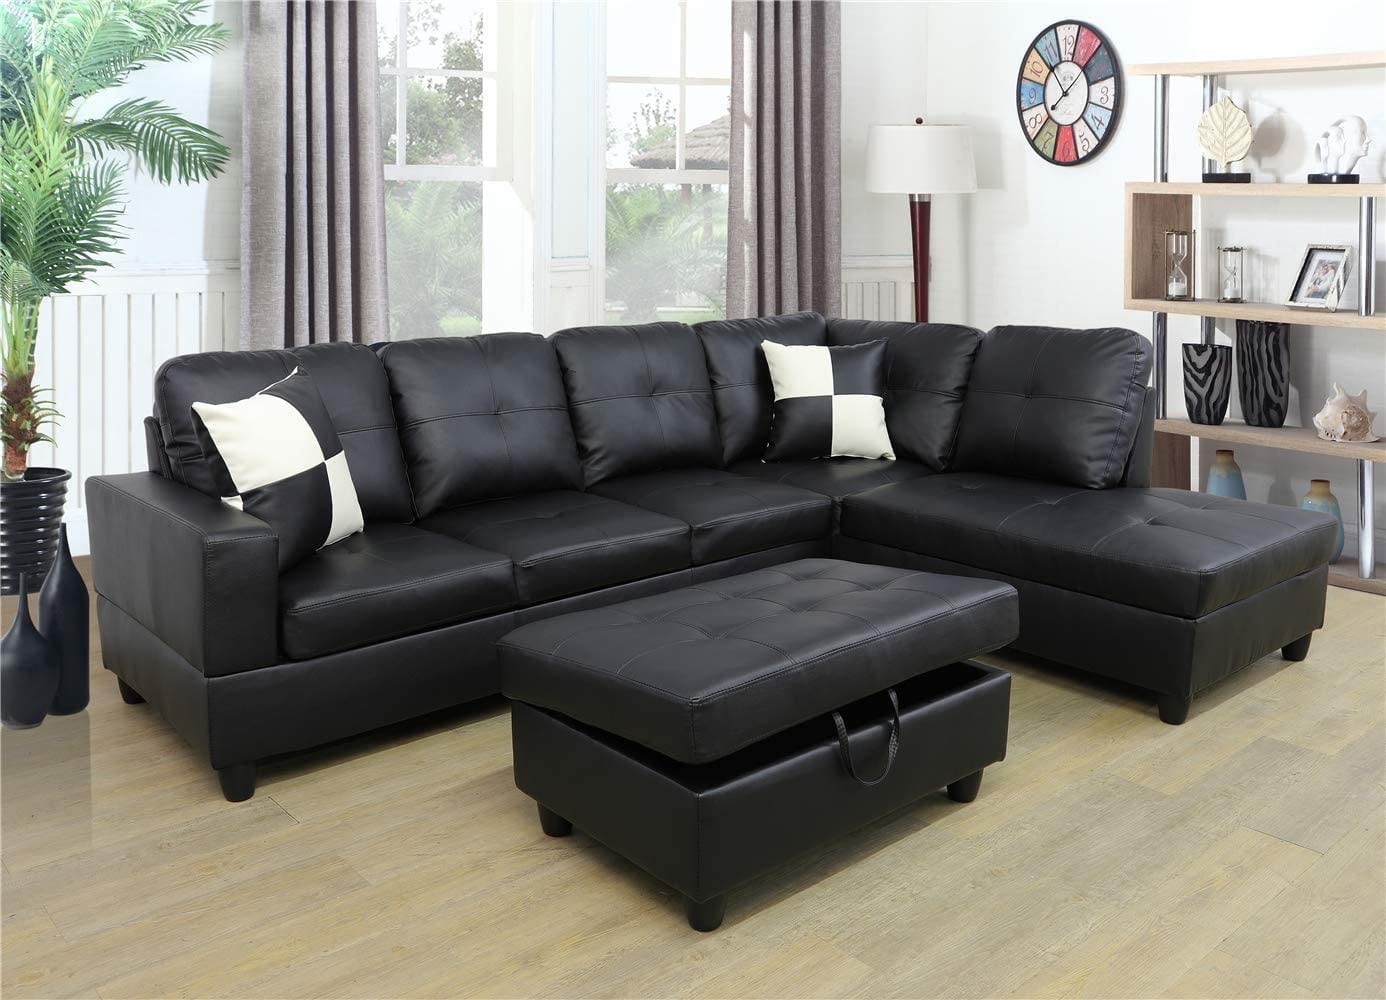 PonLiving Faux Leather 3 Piece Sectional Sofa Couch Set, L